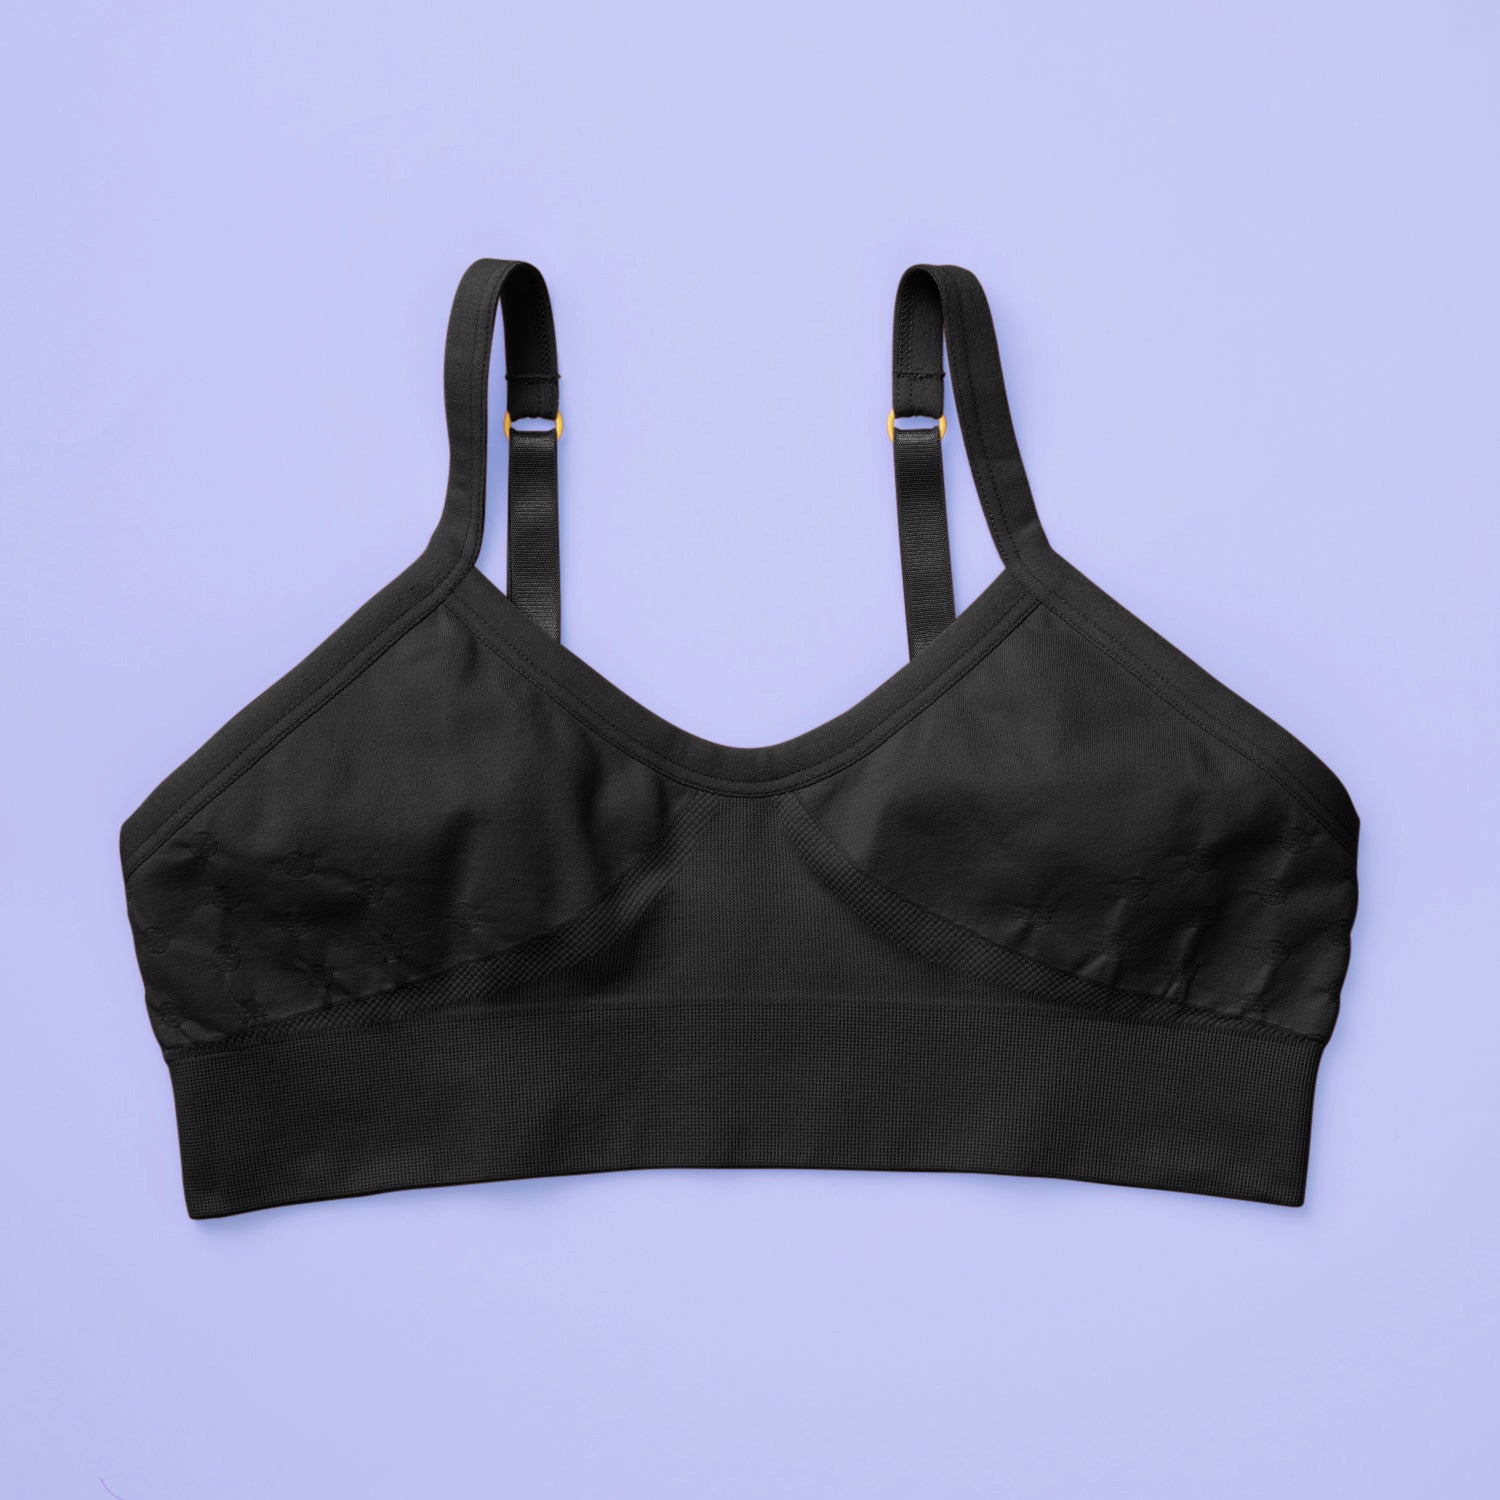 The Best First Bras For Girls. The Original By Girls For Girls